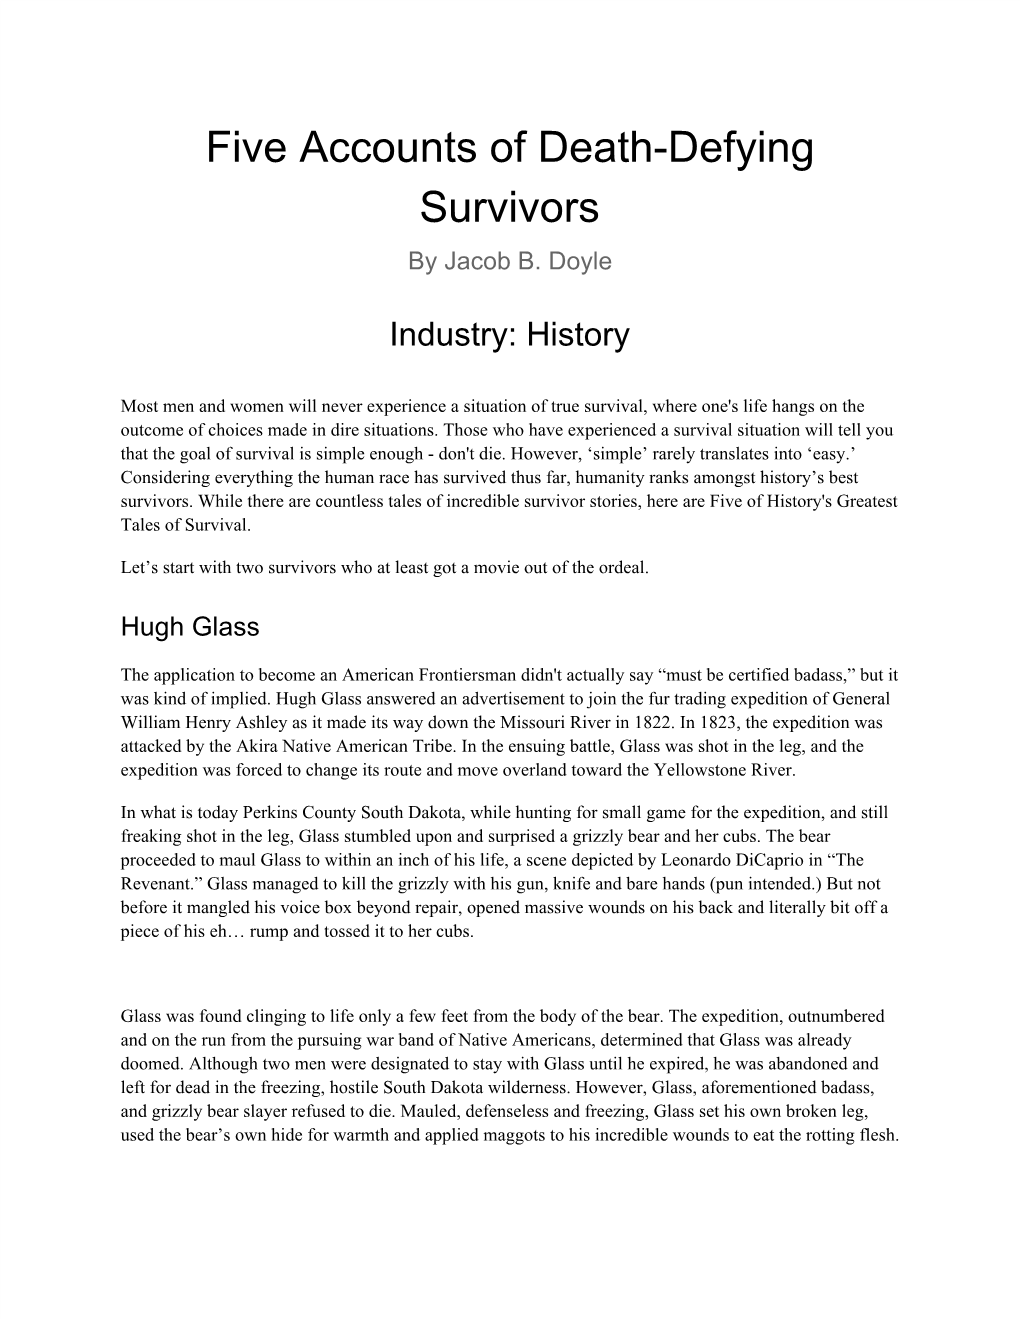 Five Accounts of Death-Defying Survivors by Jacob B